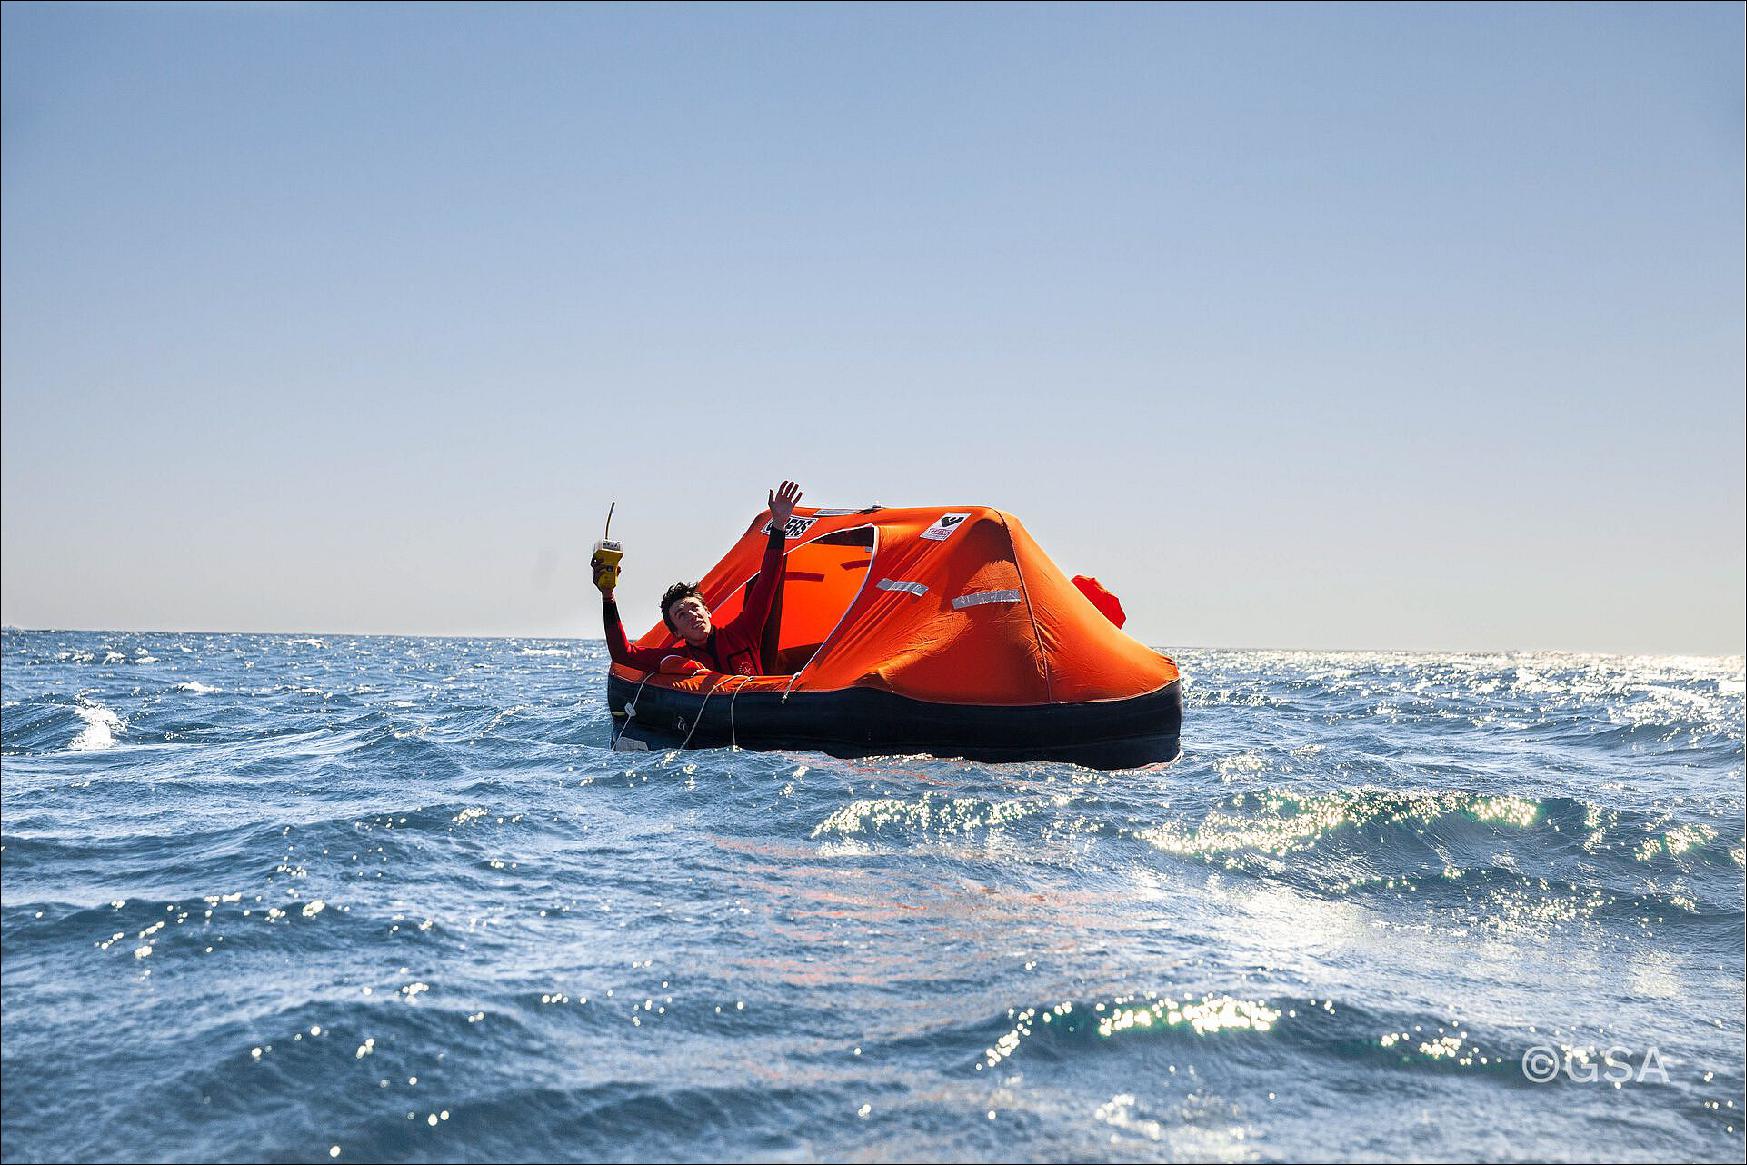 Figure 36: Stranded sailors in liftraft use an emergency position-indicating radiobeacon (EPIRB) to call for help (image credit: GSA)